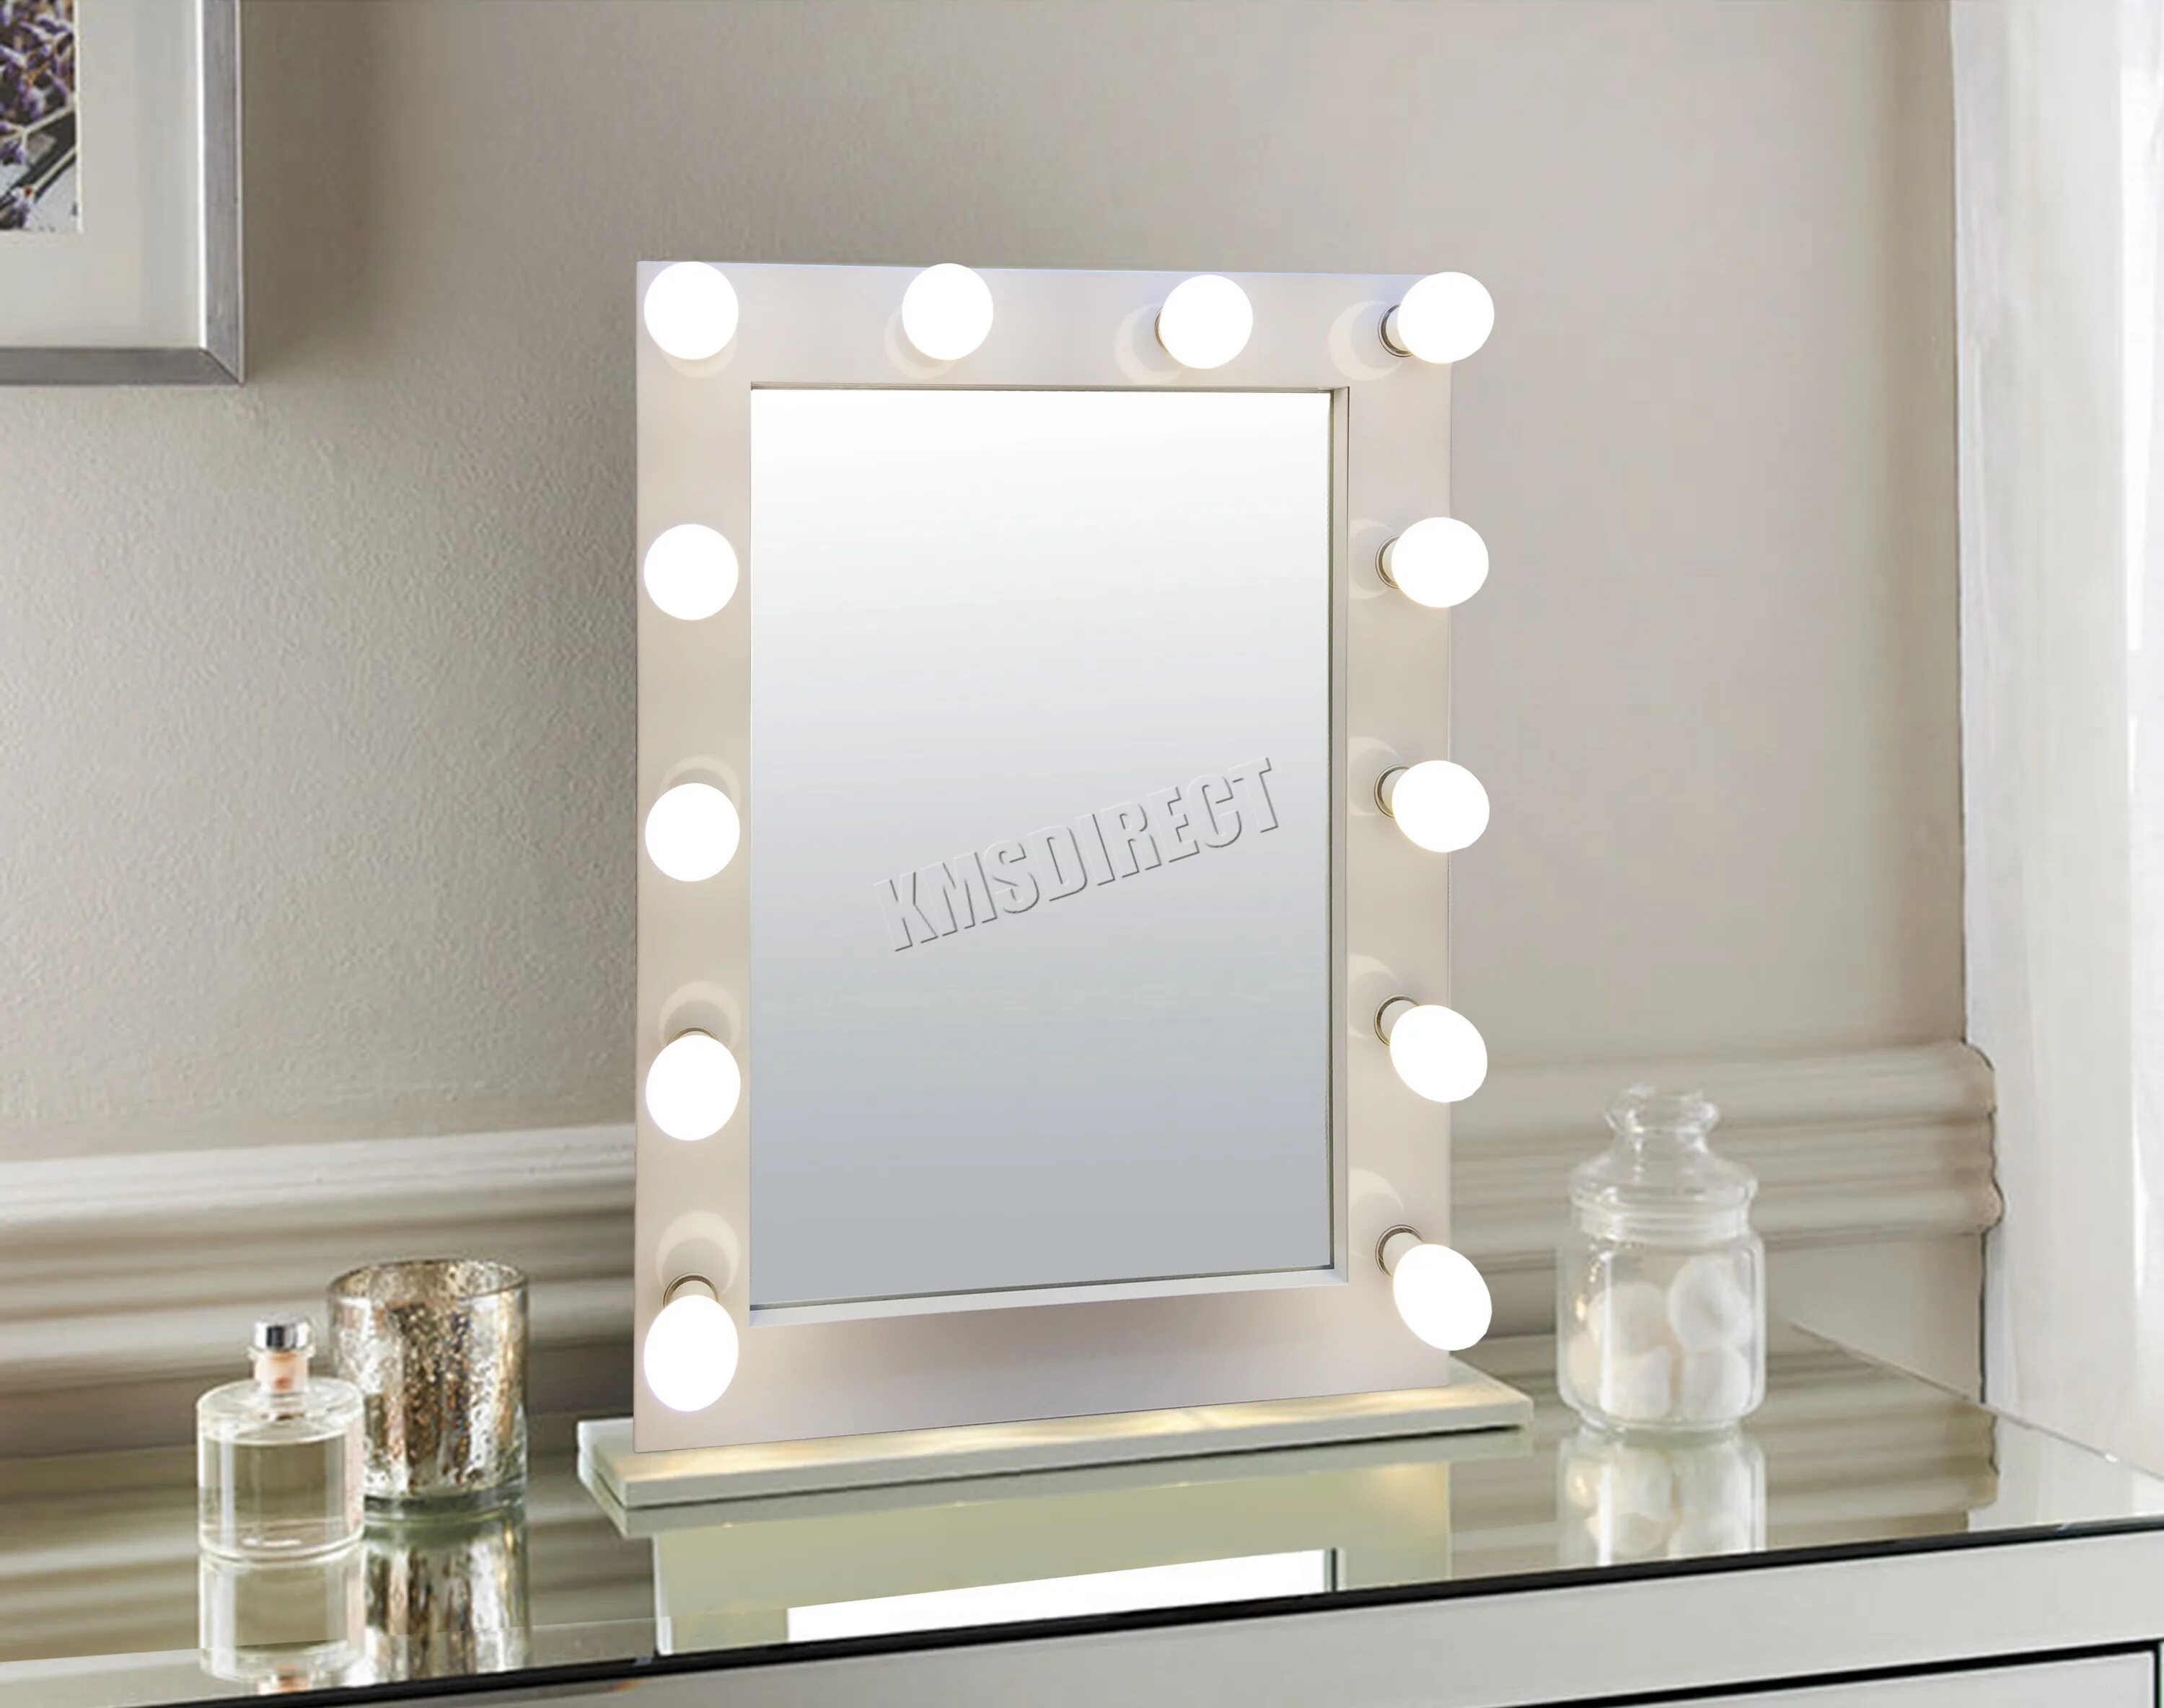 Best mirrors. Зеркало led Makeup Mirror White. Led Makeup Mirror зеркало вайлдберриз. Зеркало led Beauty Makeup Mirror RT-l03. Led зеркало для макияжа корона.